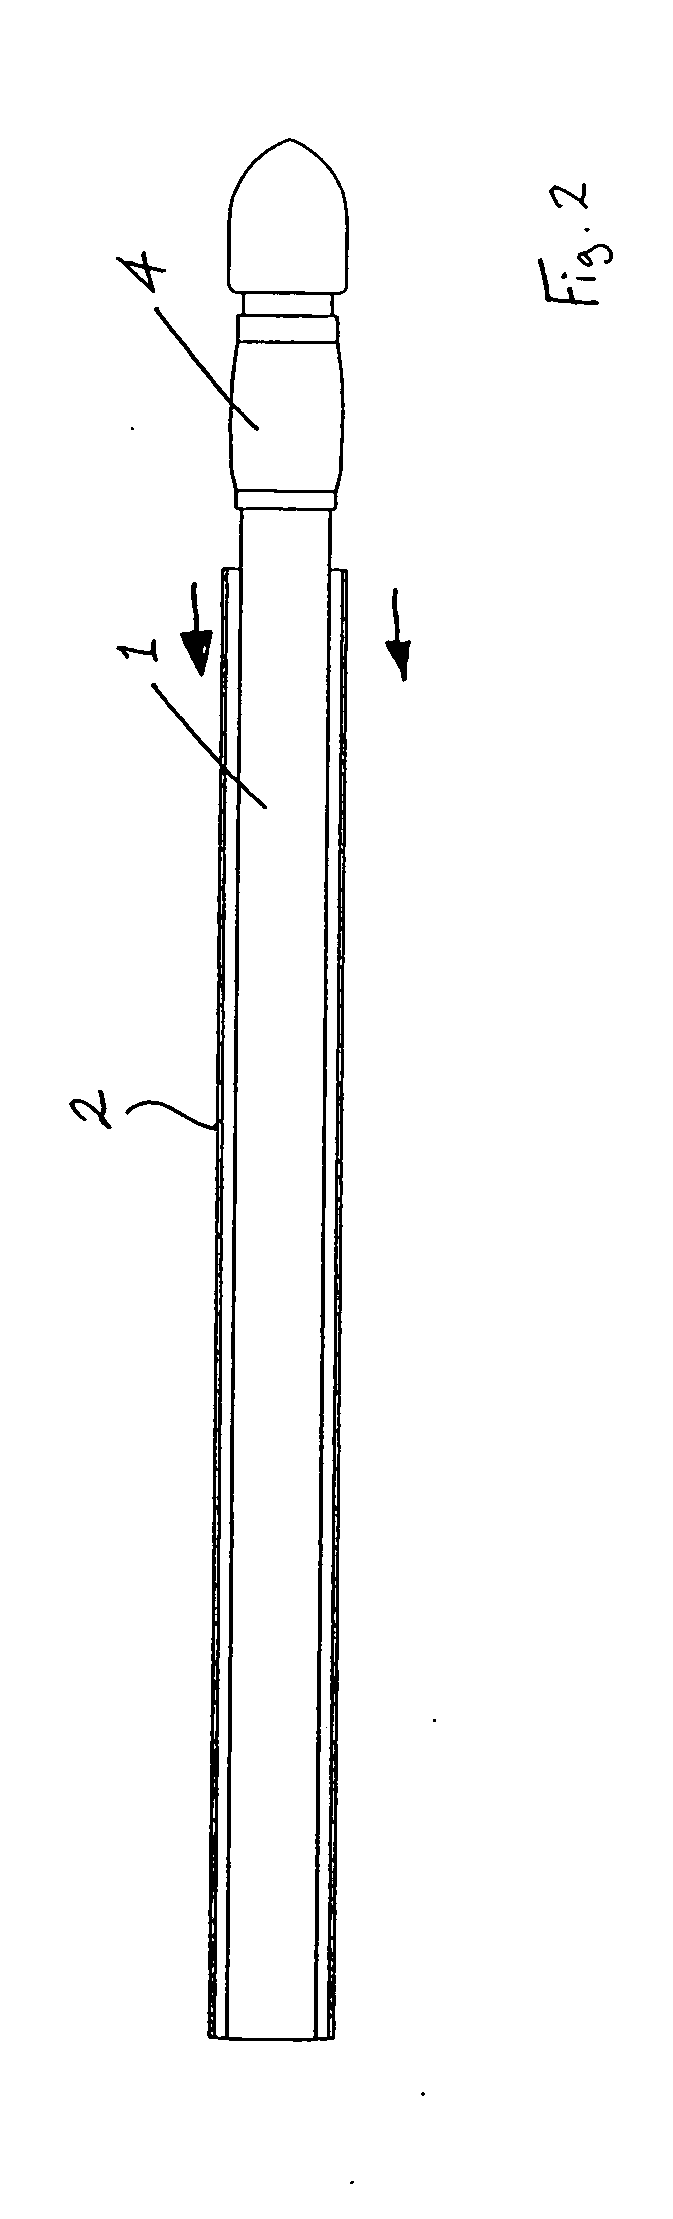 Interventional medical closure device